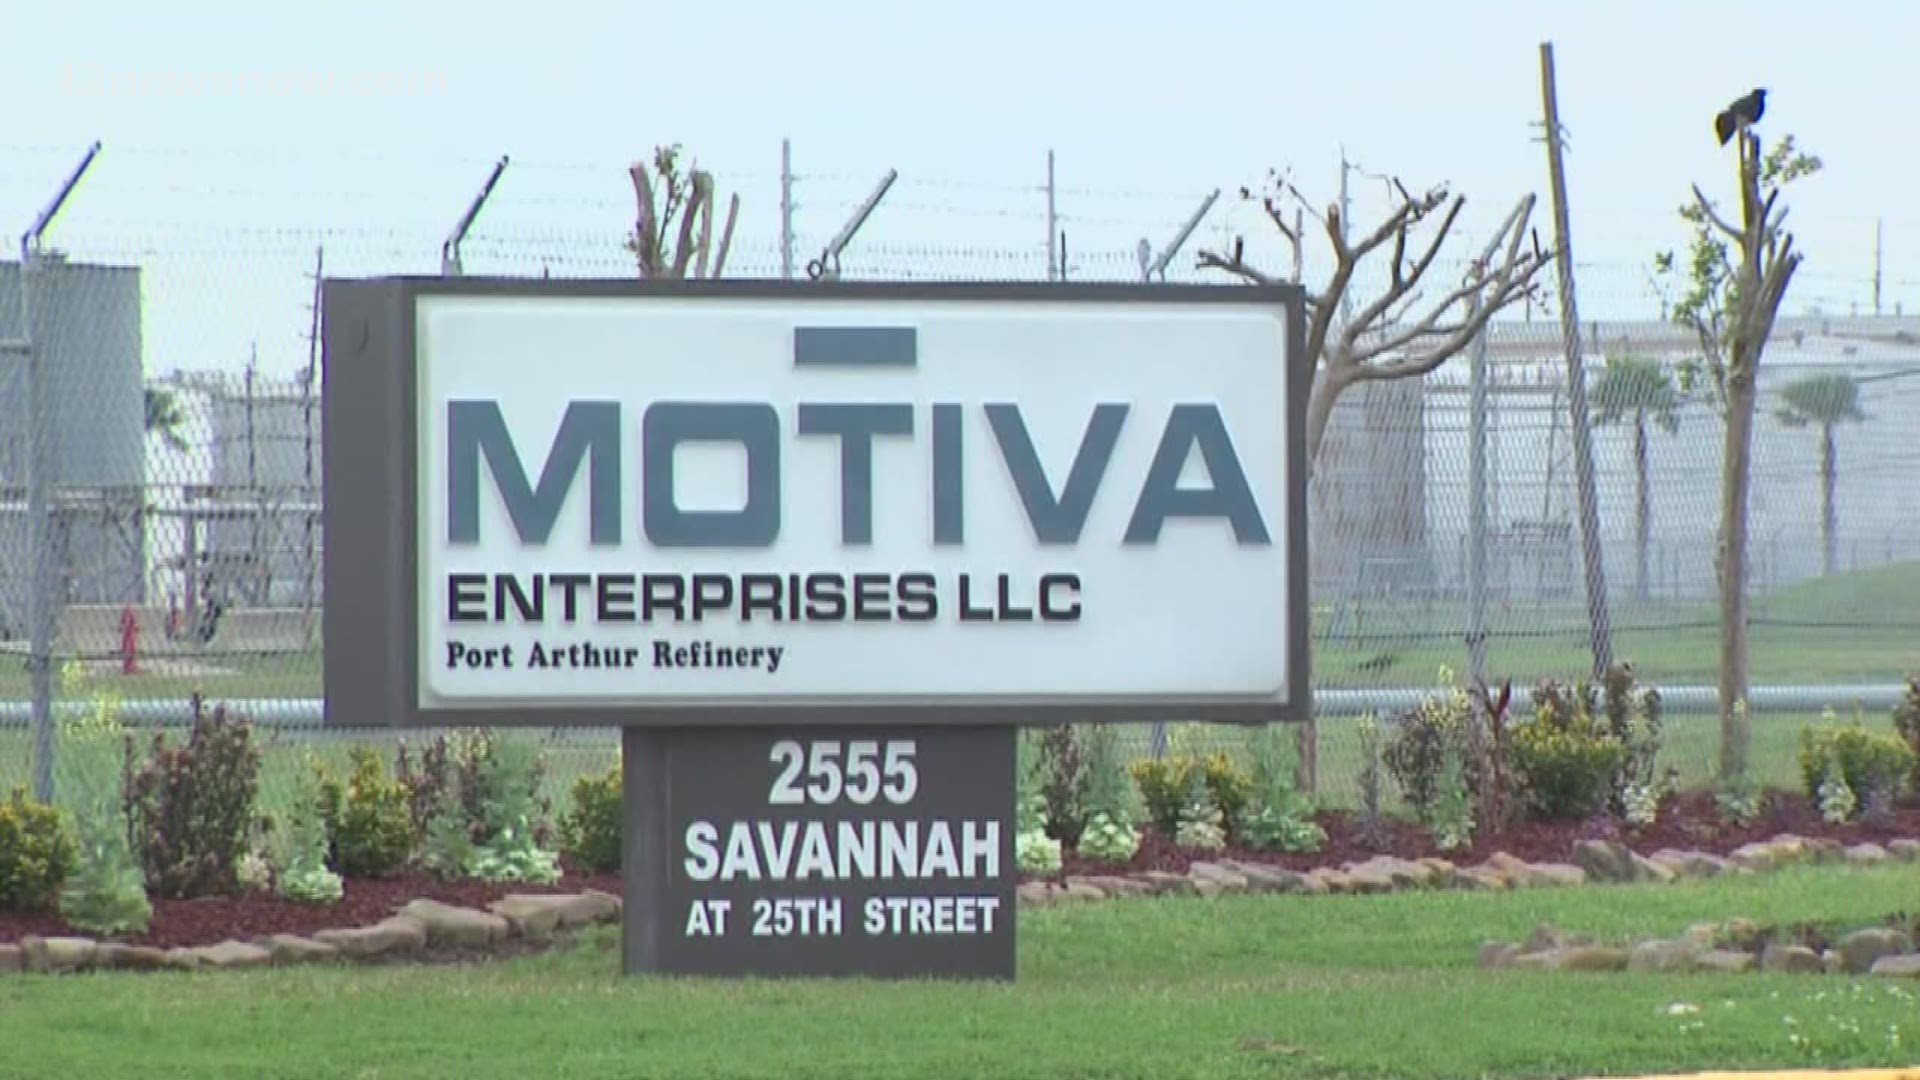 200 employees will be laid off. More industrial jobs may follow suit.